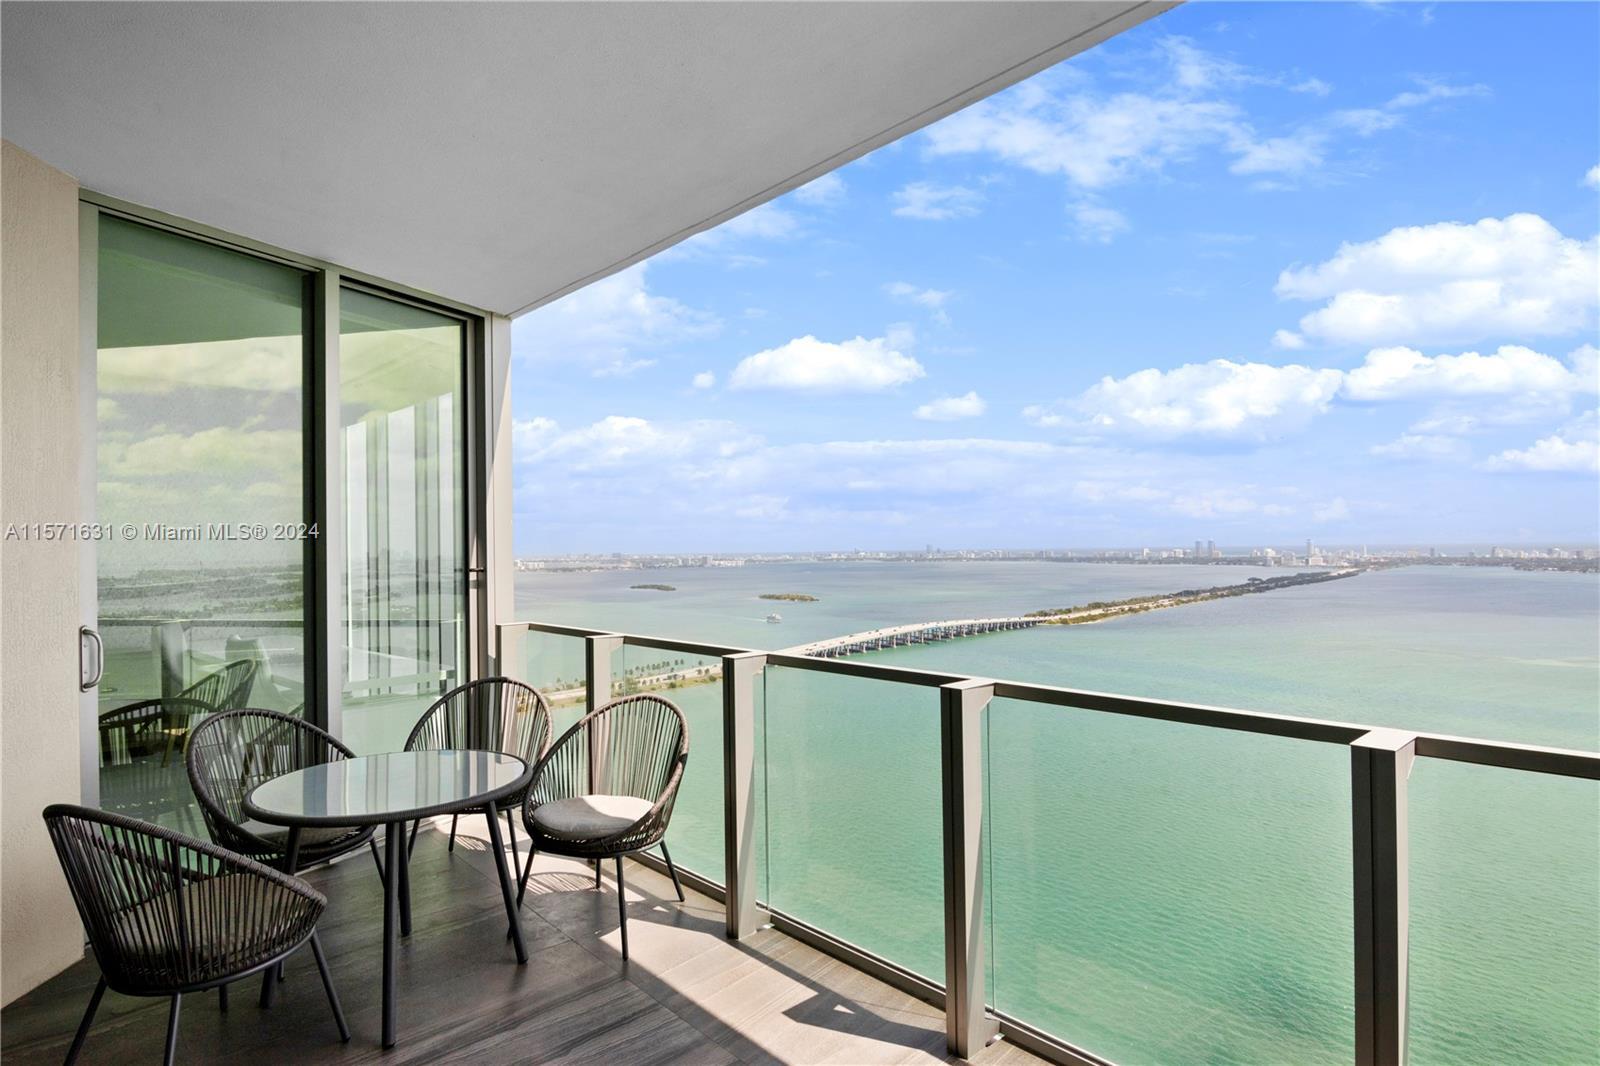 Fully furnished 2 bedroom, 3 bathroom residence with stunning 41st floor, direct bay and ocean views